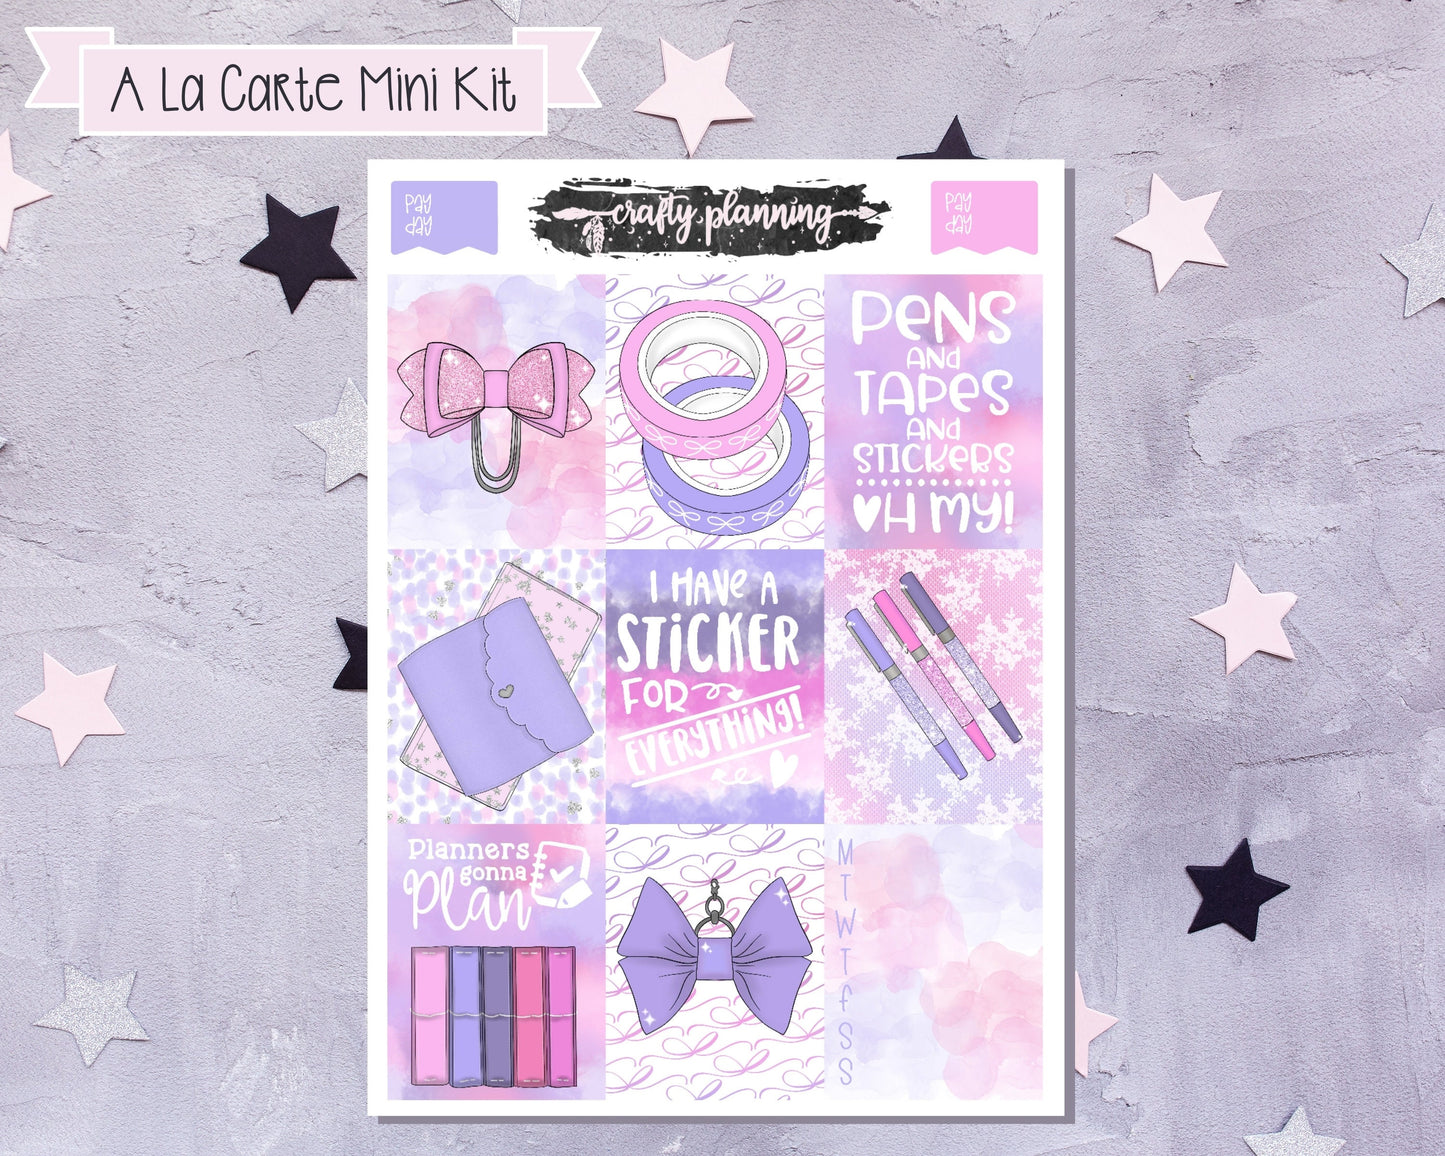 Weekly Mini Kit, A La Carte Kit, Stationery Themed Kit, Full Boxes, Pastel Planner Kit, Planner Stickers, Planners Gonna Plan